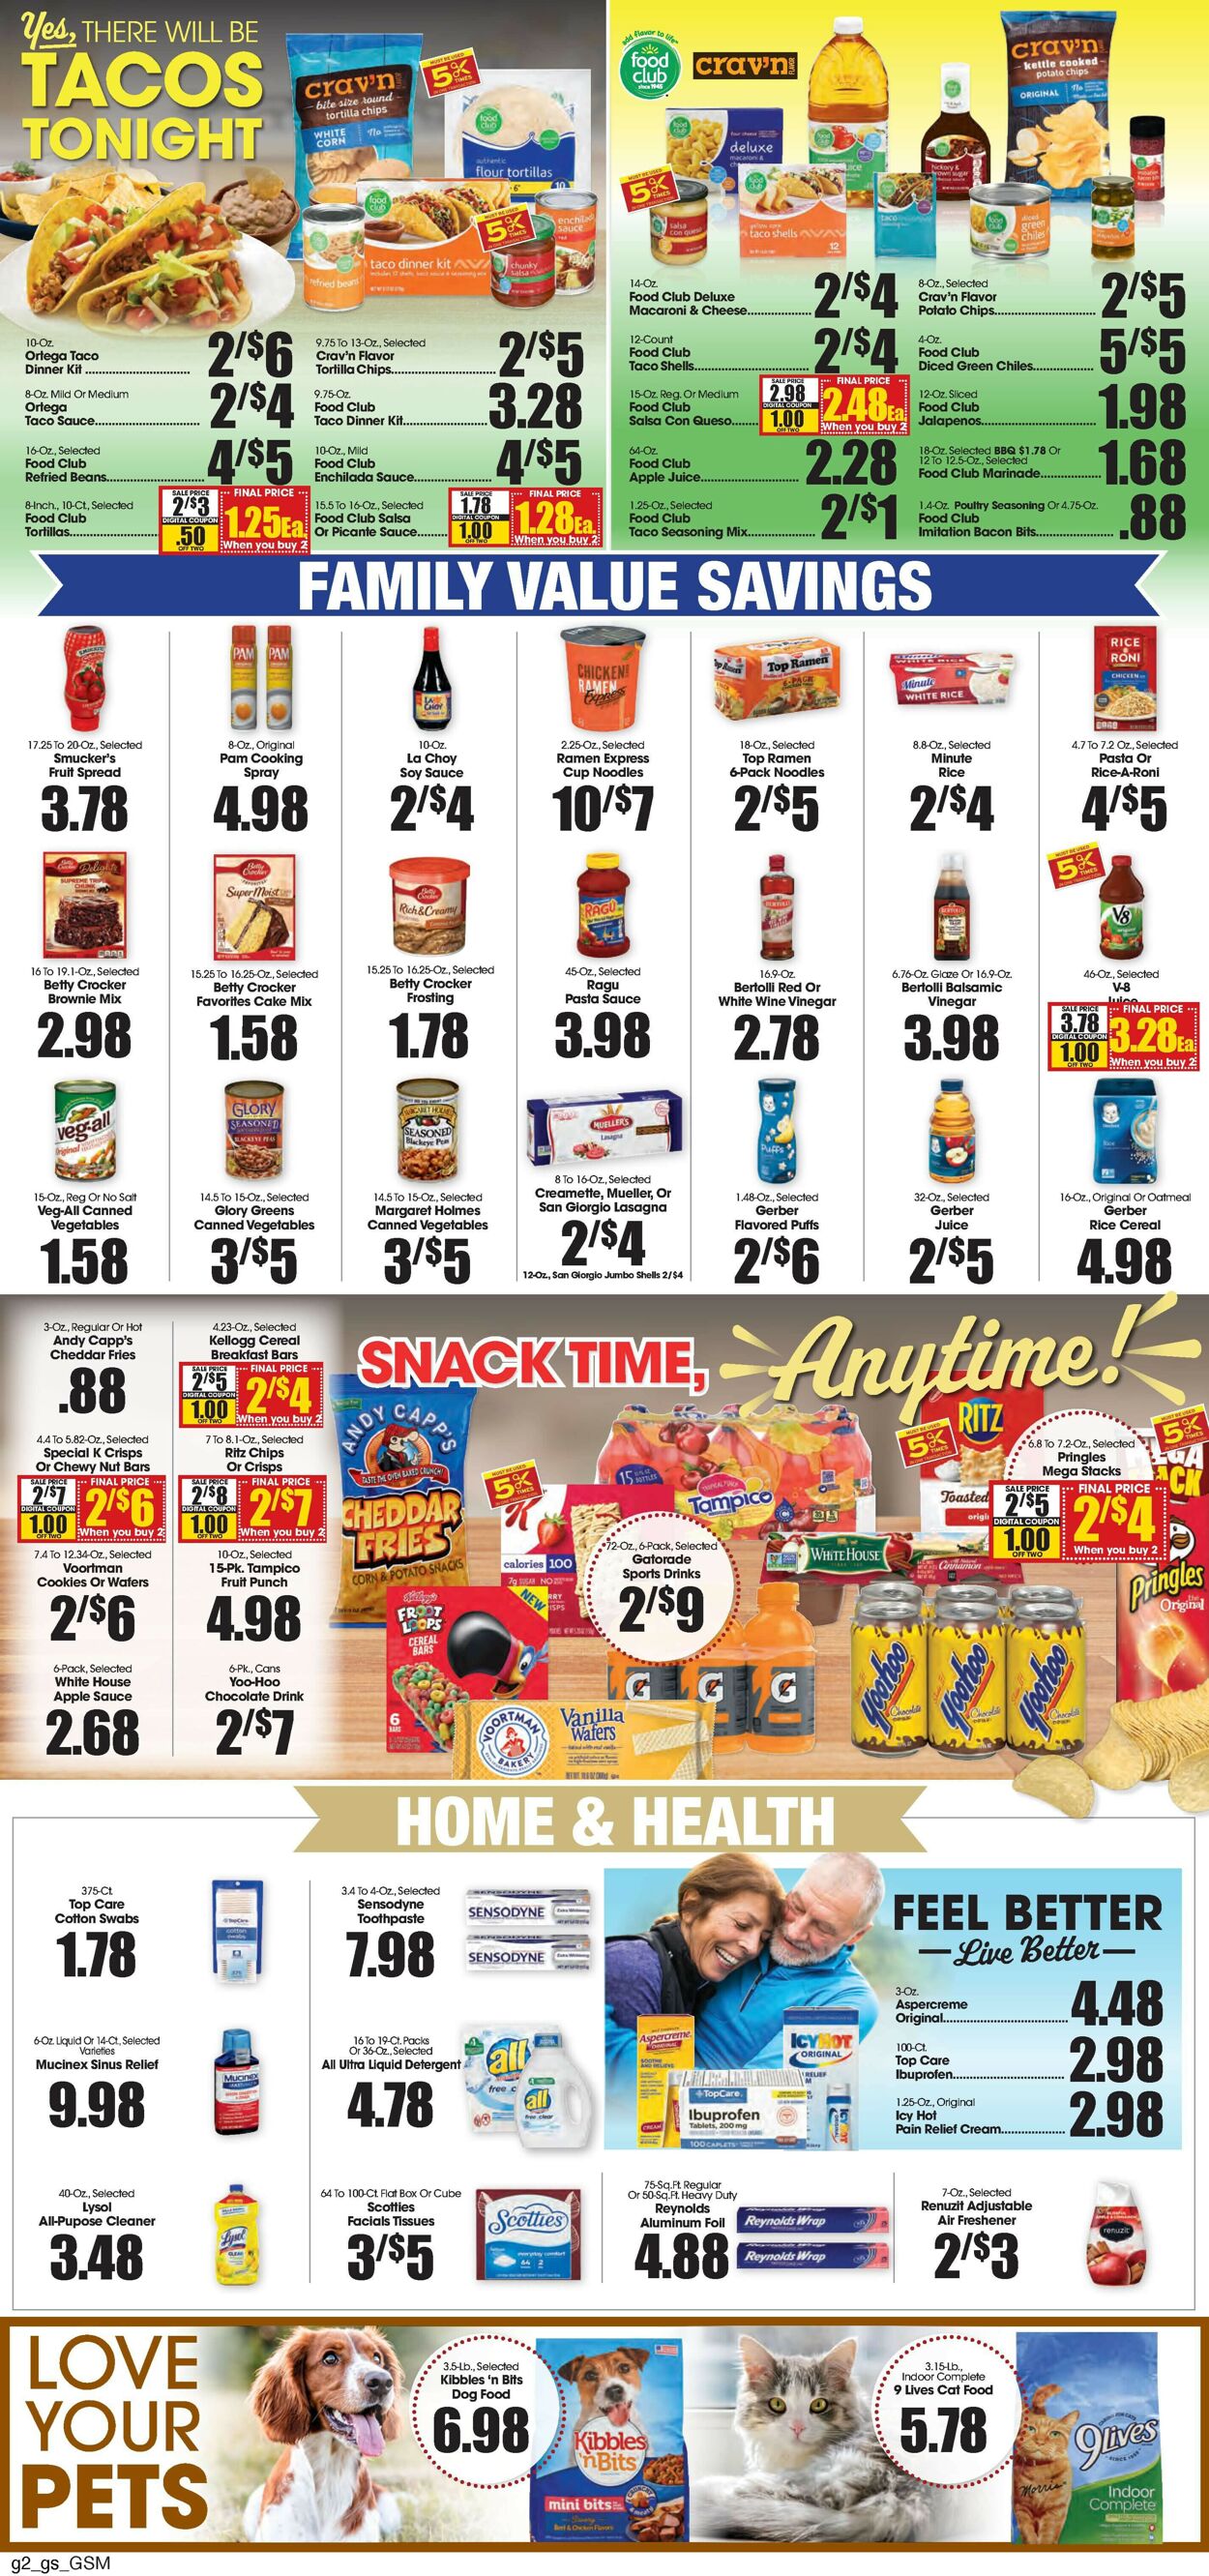 Grant's Supermarket Ad from 04/22/2023